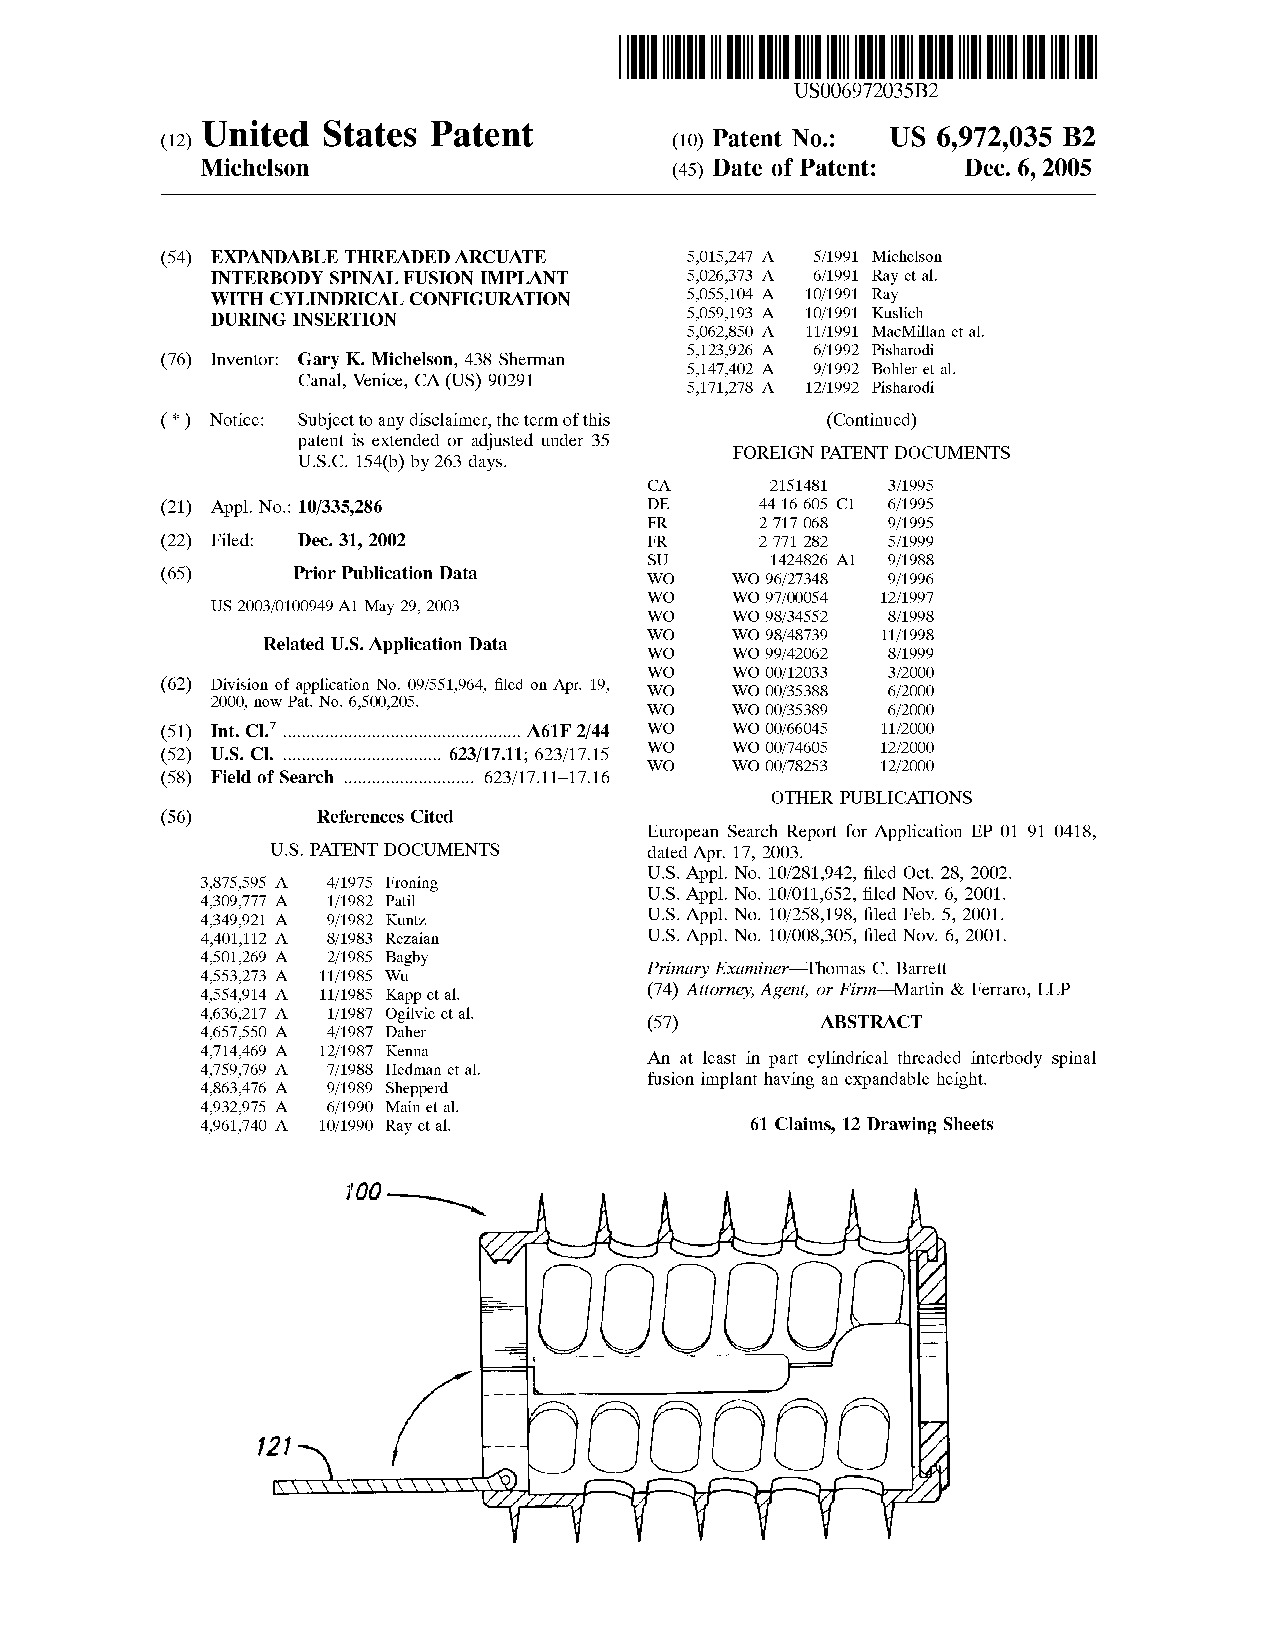 Expandable threaded arcuate interbody spinal fusion implant with     cylindrical configuration during insertion - Patent 6,972,035